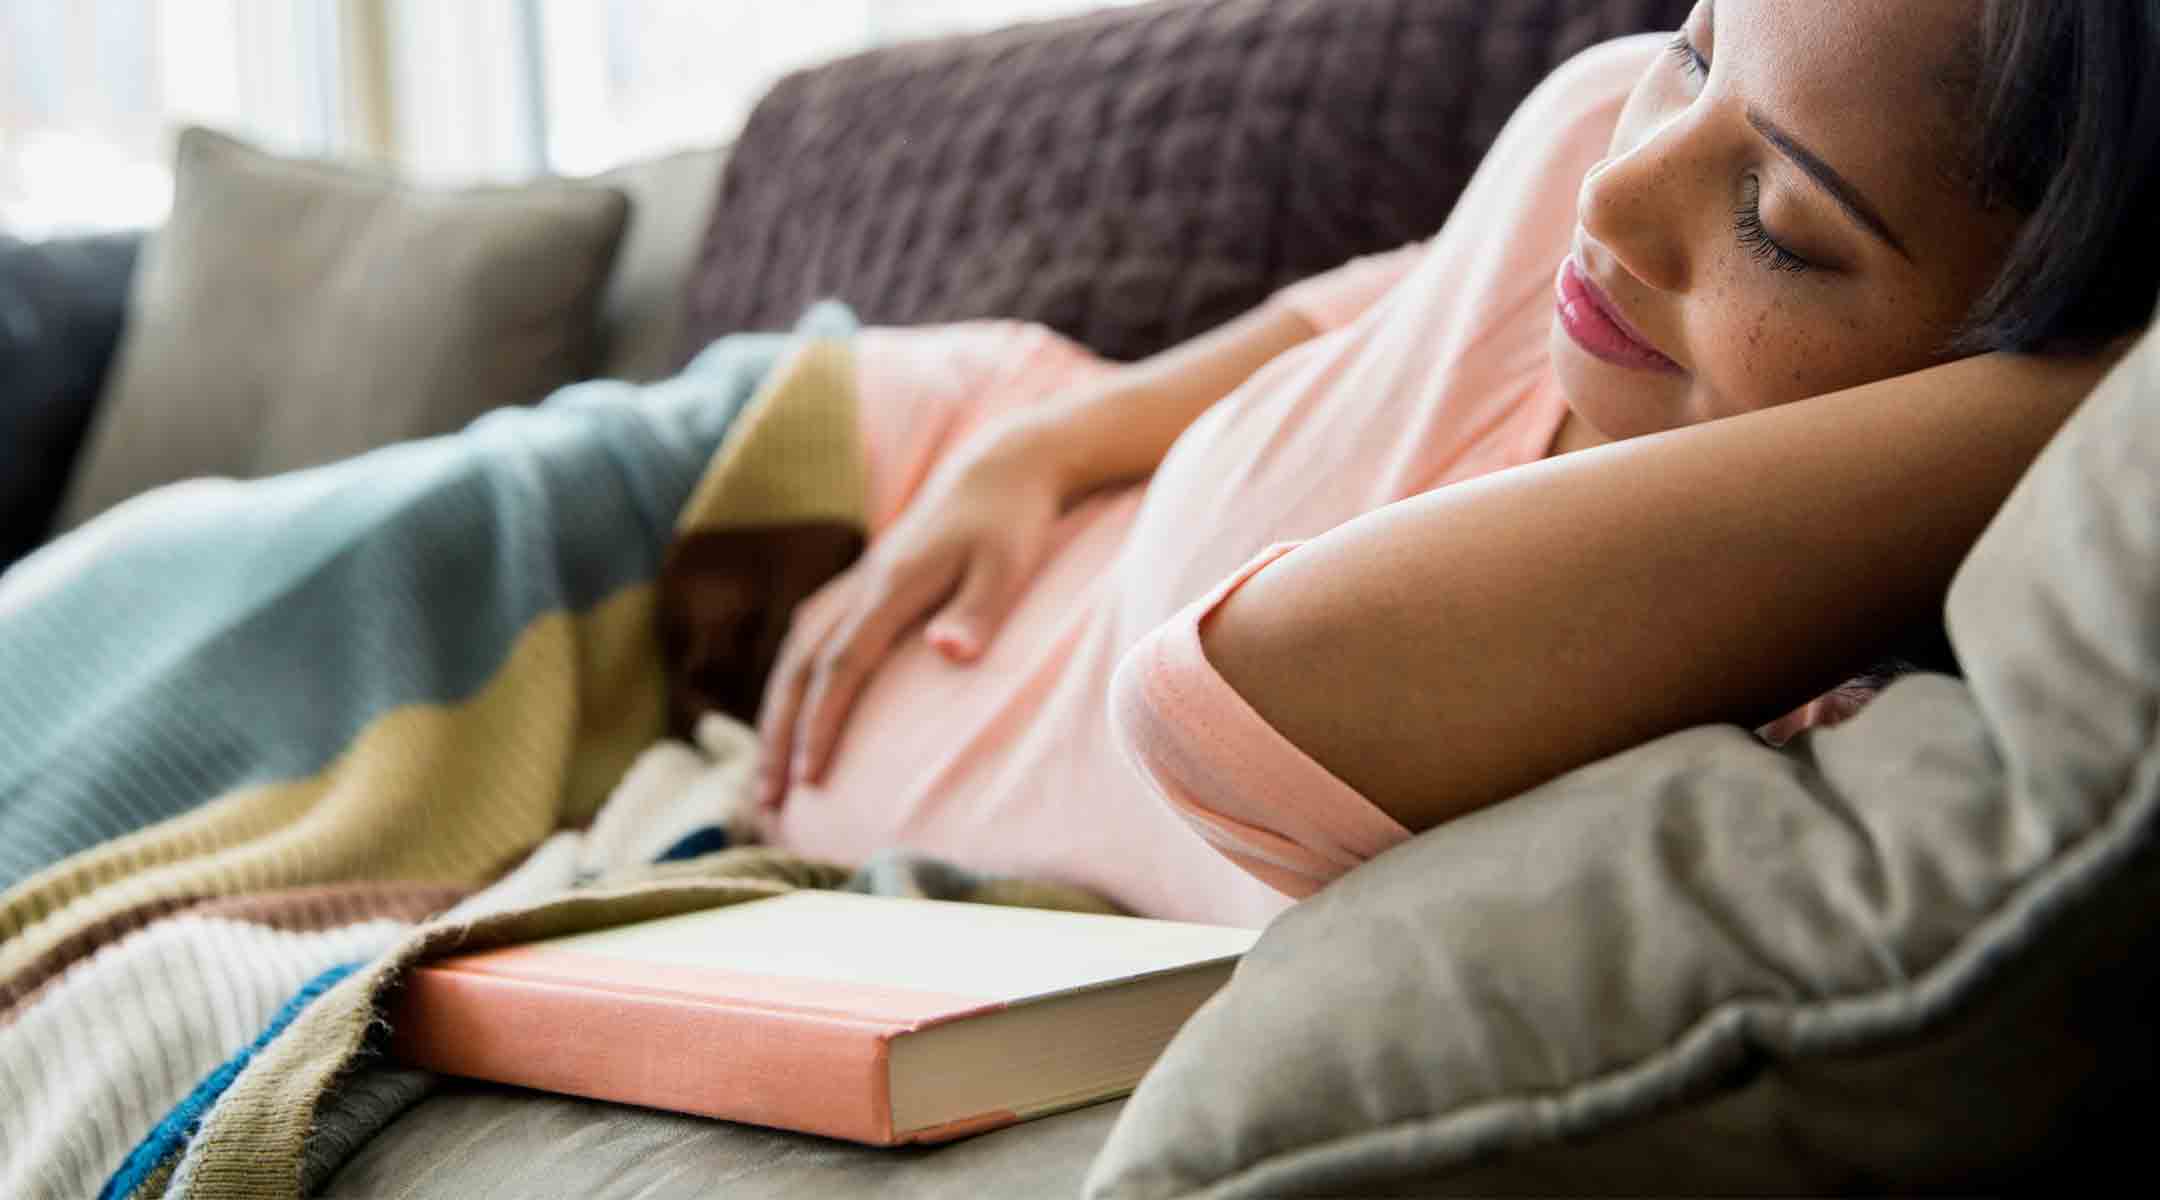 pregnant woman taking a nap on couch at home